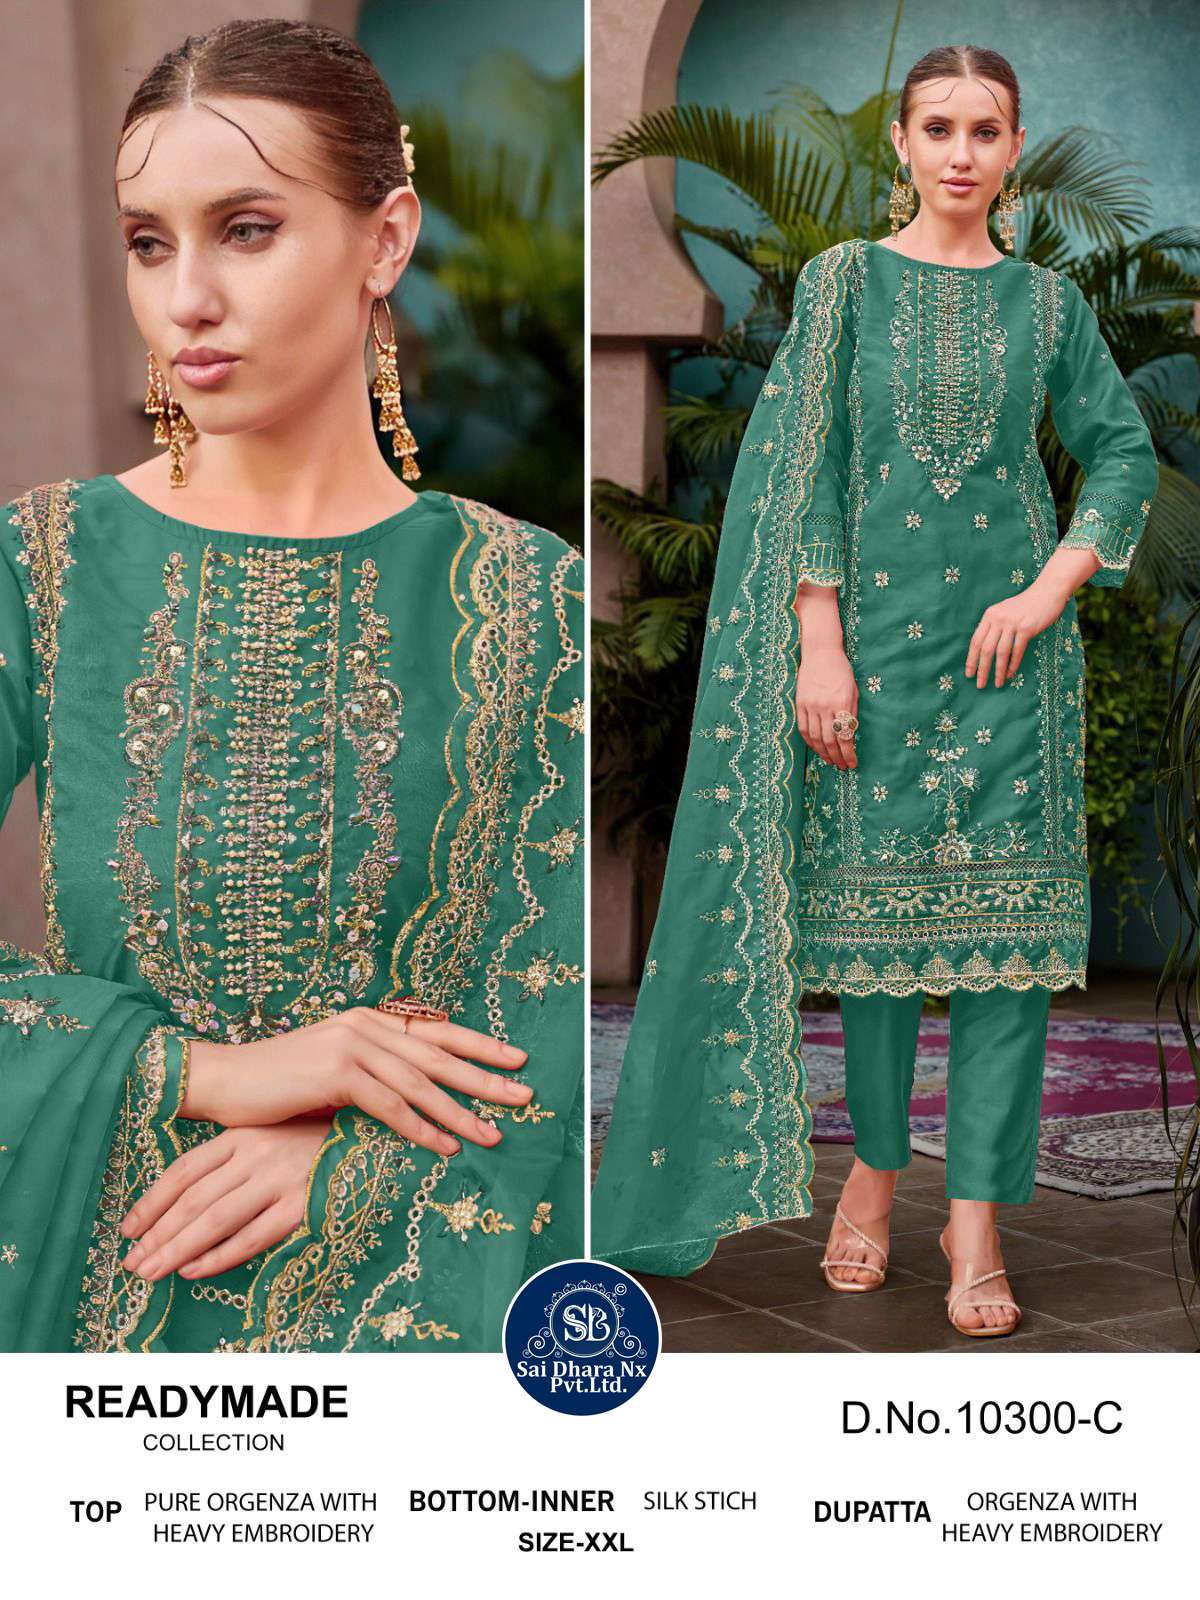 ZAHA PRESENTS ORGANZA WITH EMBROIDERY READYMADE 3 PAKISTANI PIECE SUIT WHOLESALE SHOP IN SURAT - SaiDharaNx